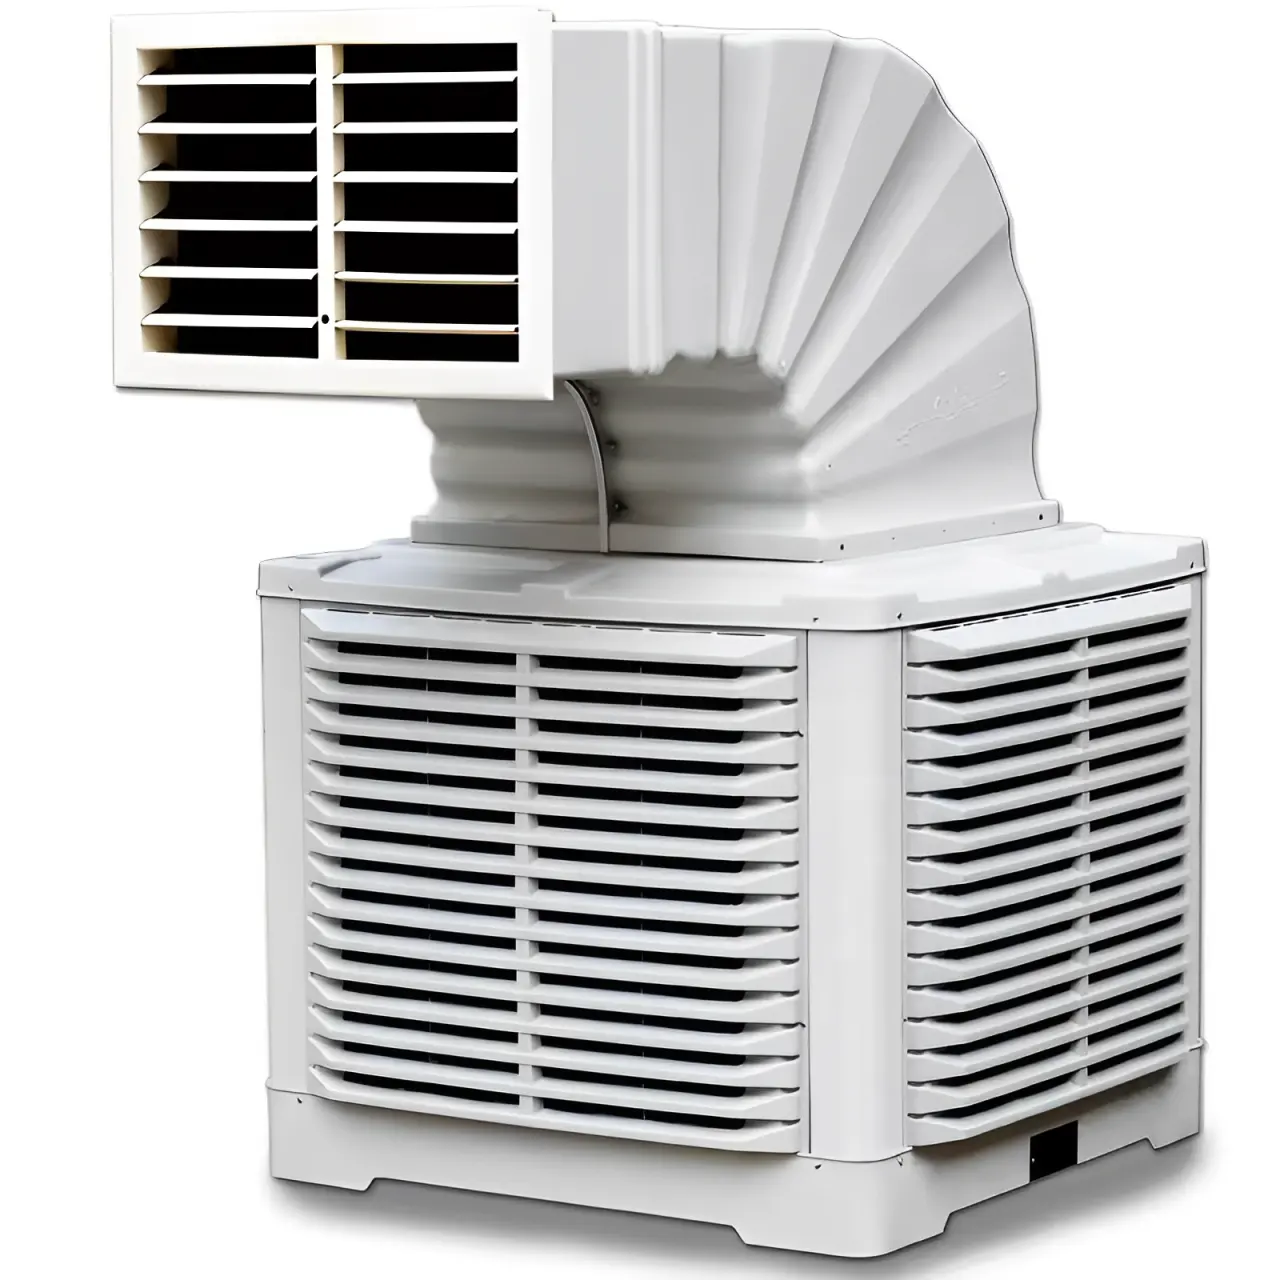 Industrial Duct Air Conditioning System/Evaporative Air Coolers Industrial/Water Cooling Exhaust Fan Cooler For Workshop